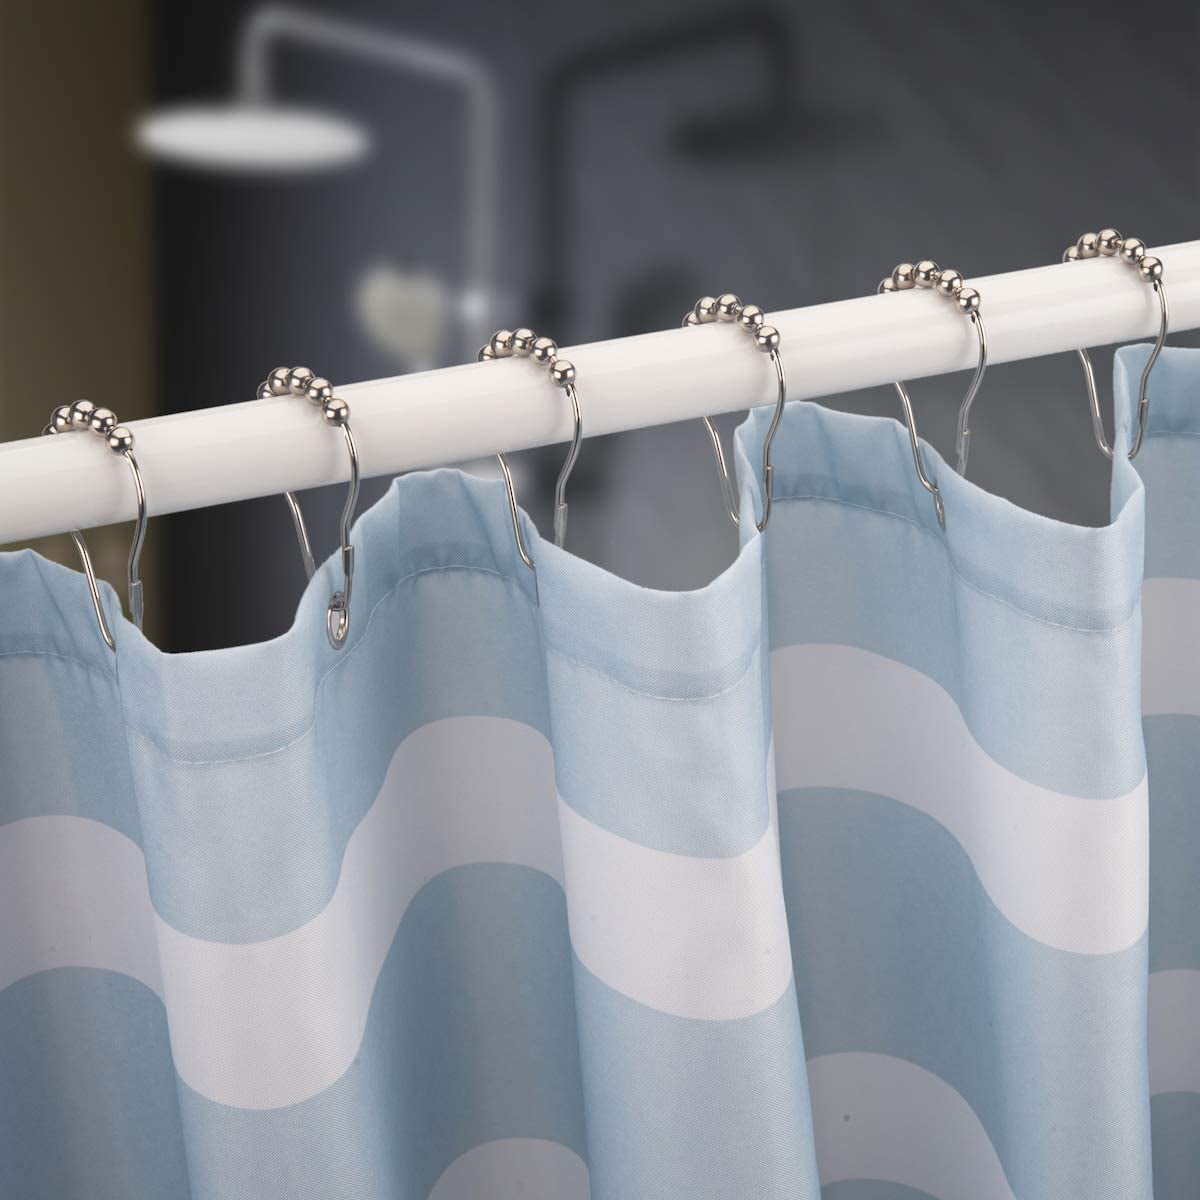 Details about   DadyMart Shower Curtain Hooks Rust Resistant Shower Curtain Rings Metal Bronze 